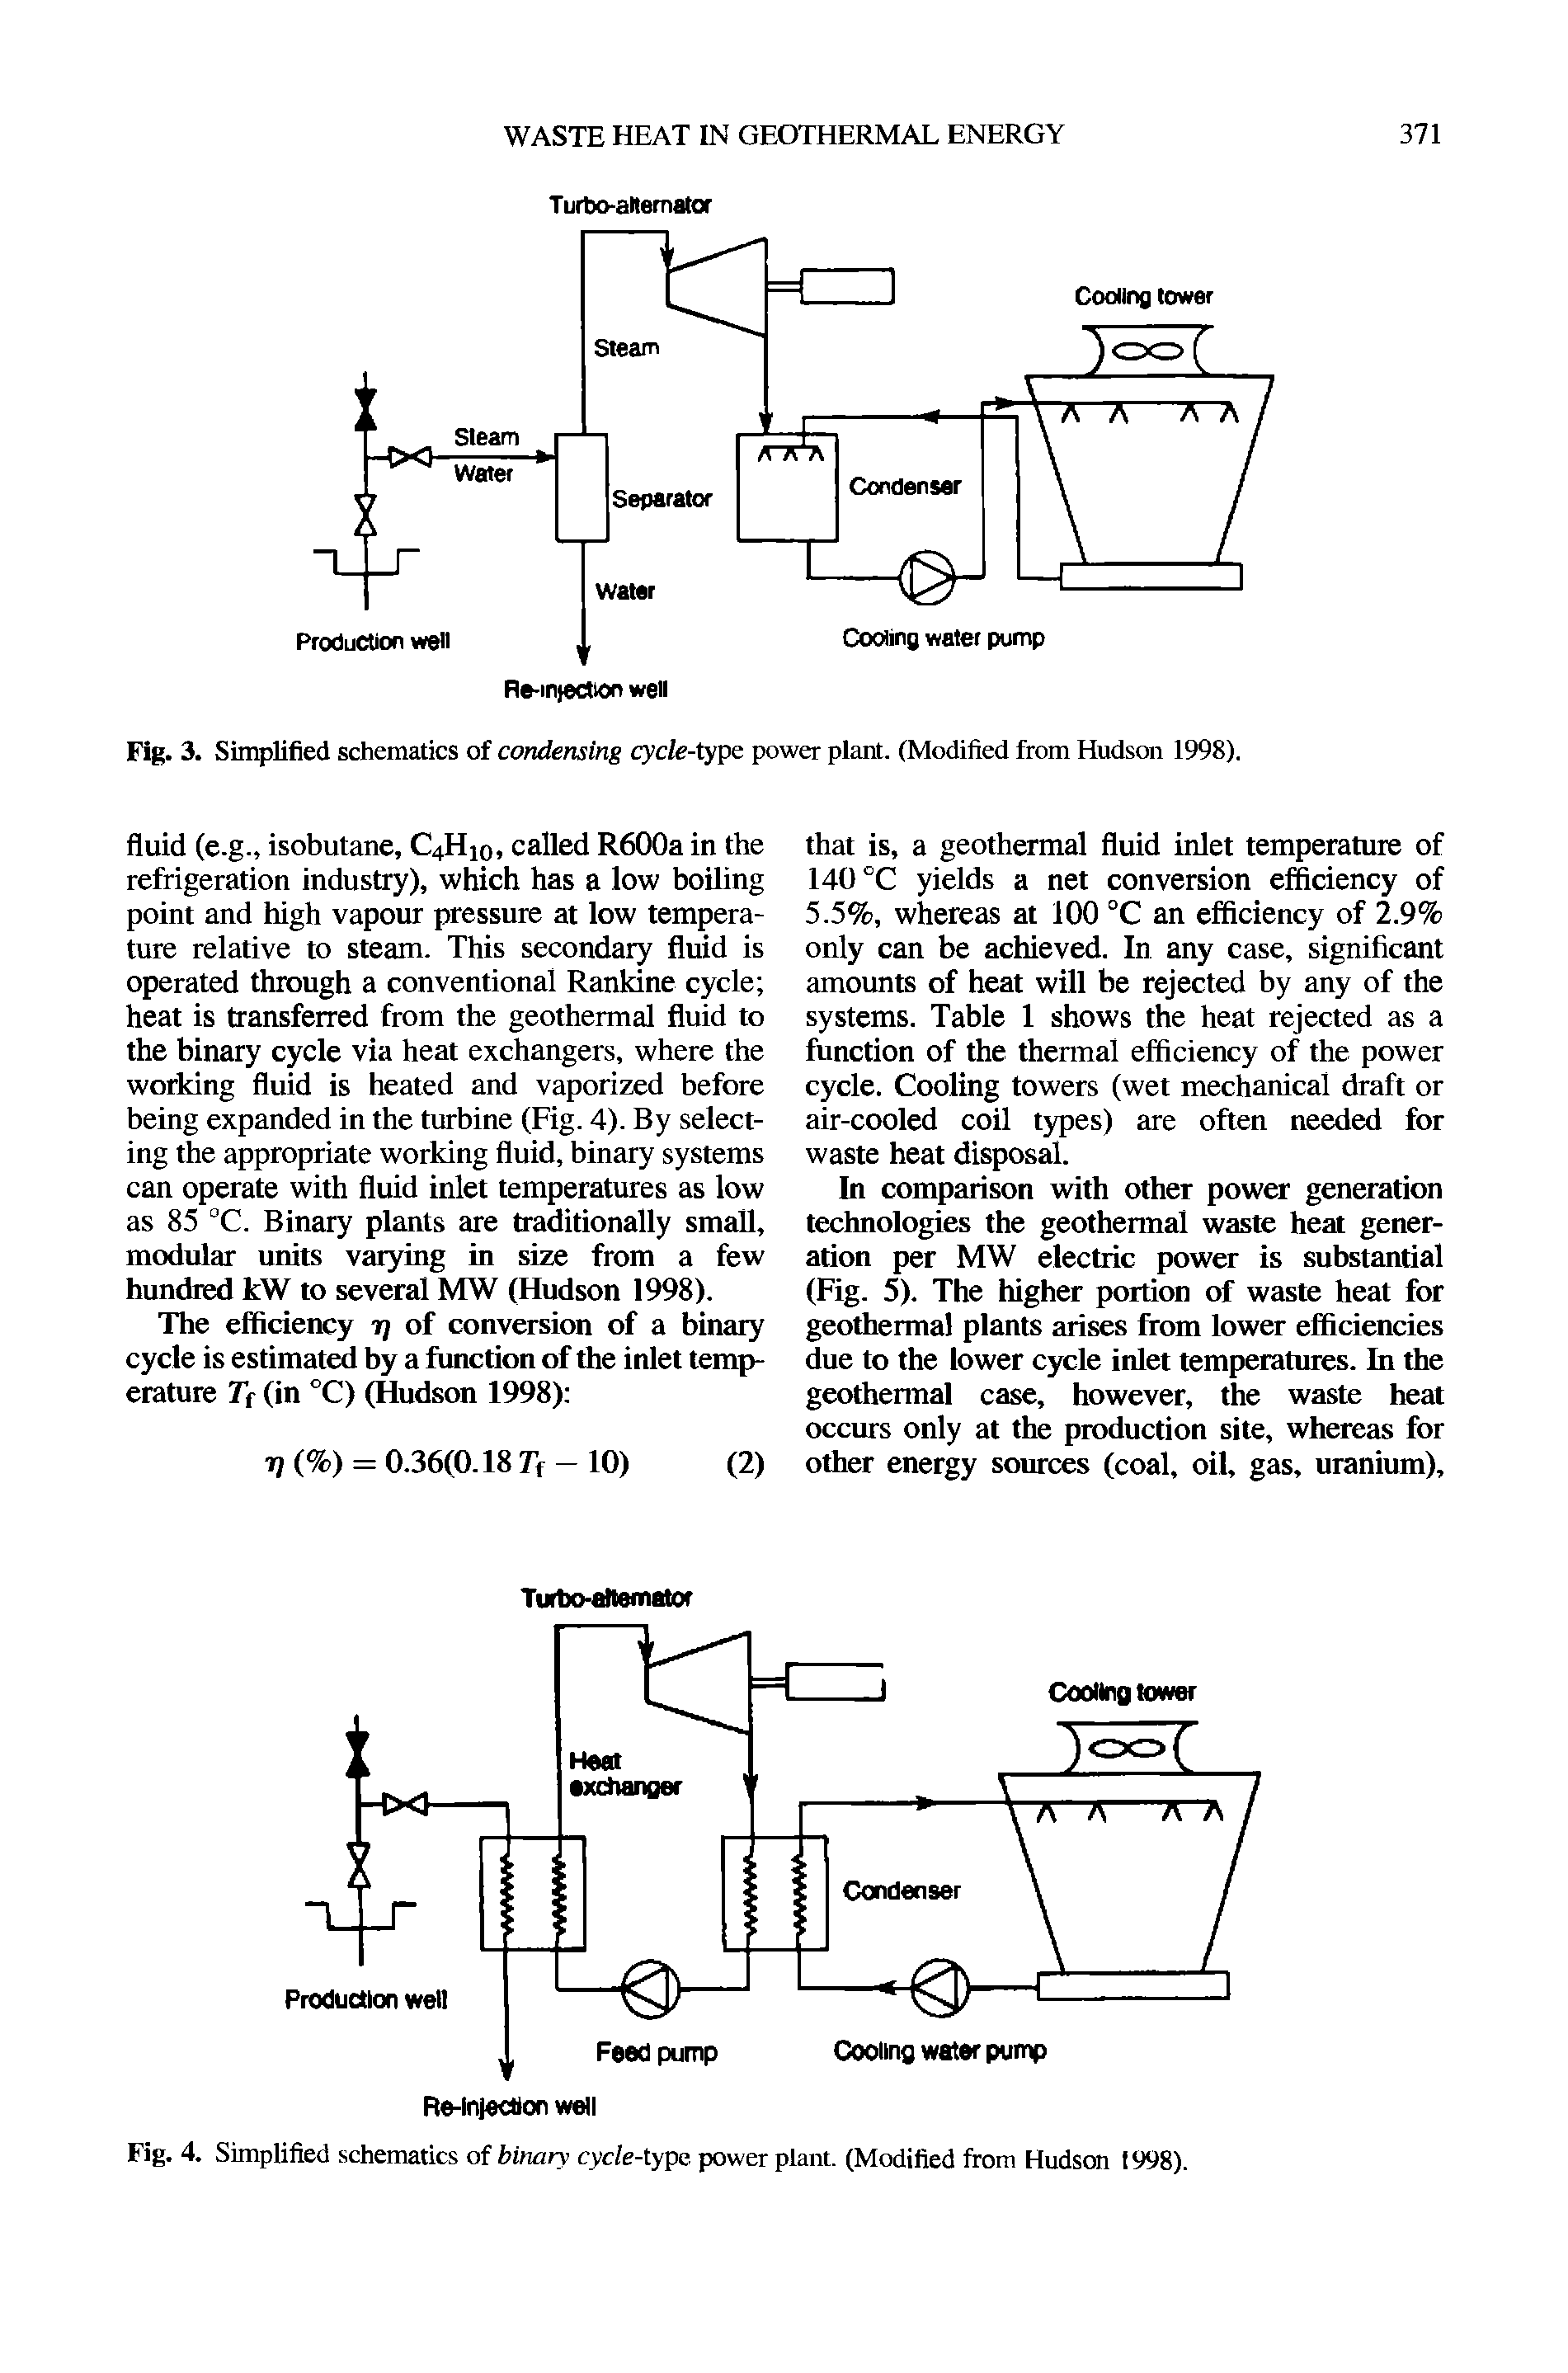 Fig. 4. Simplified schematics of binary cycle-type power plant. (Modified from Hudson 1998).